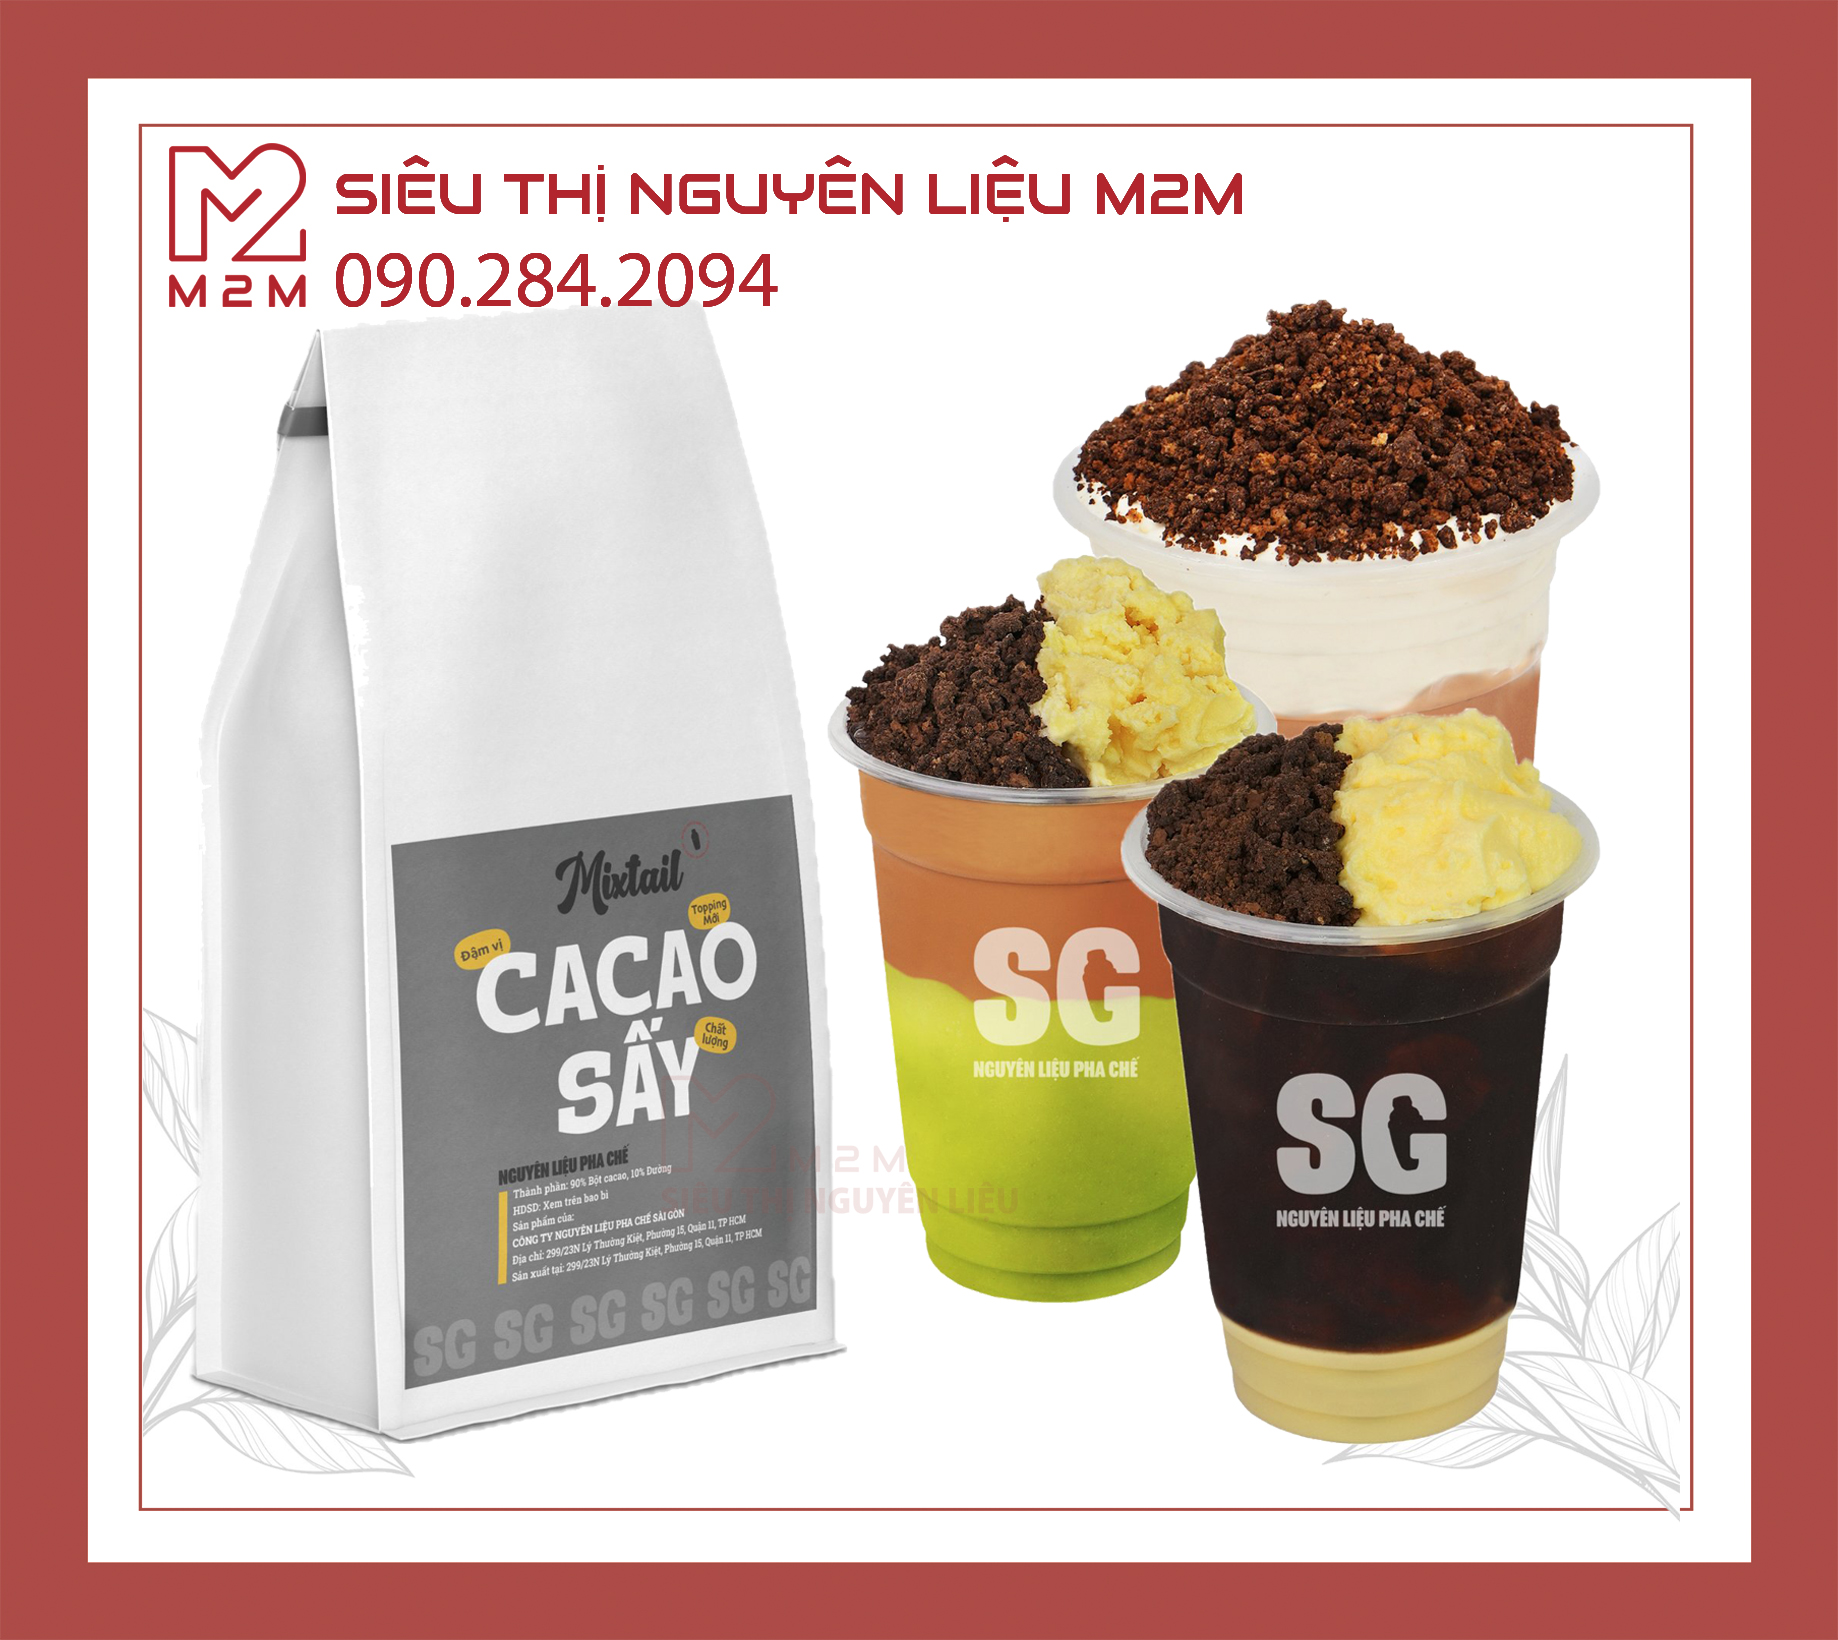 Cacao sấy Mixtail 500gr